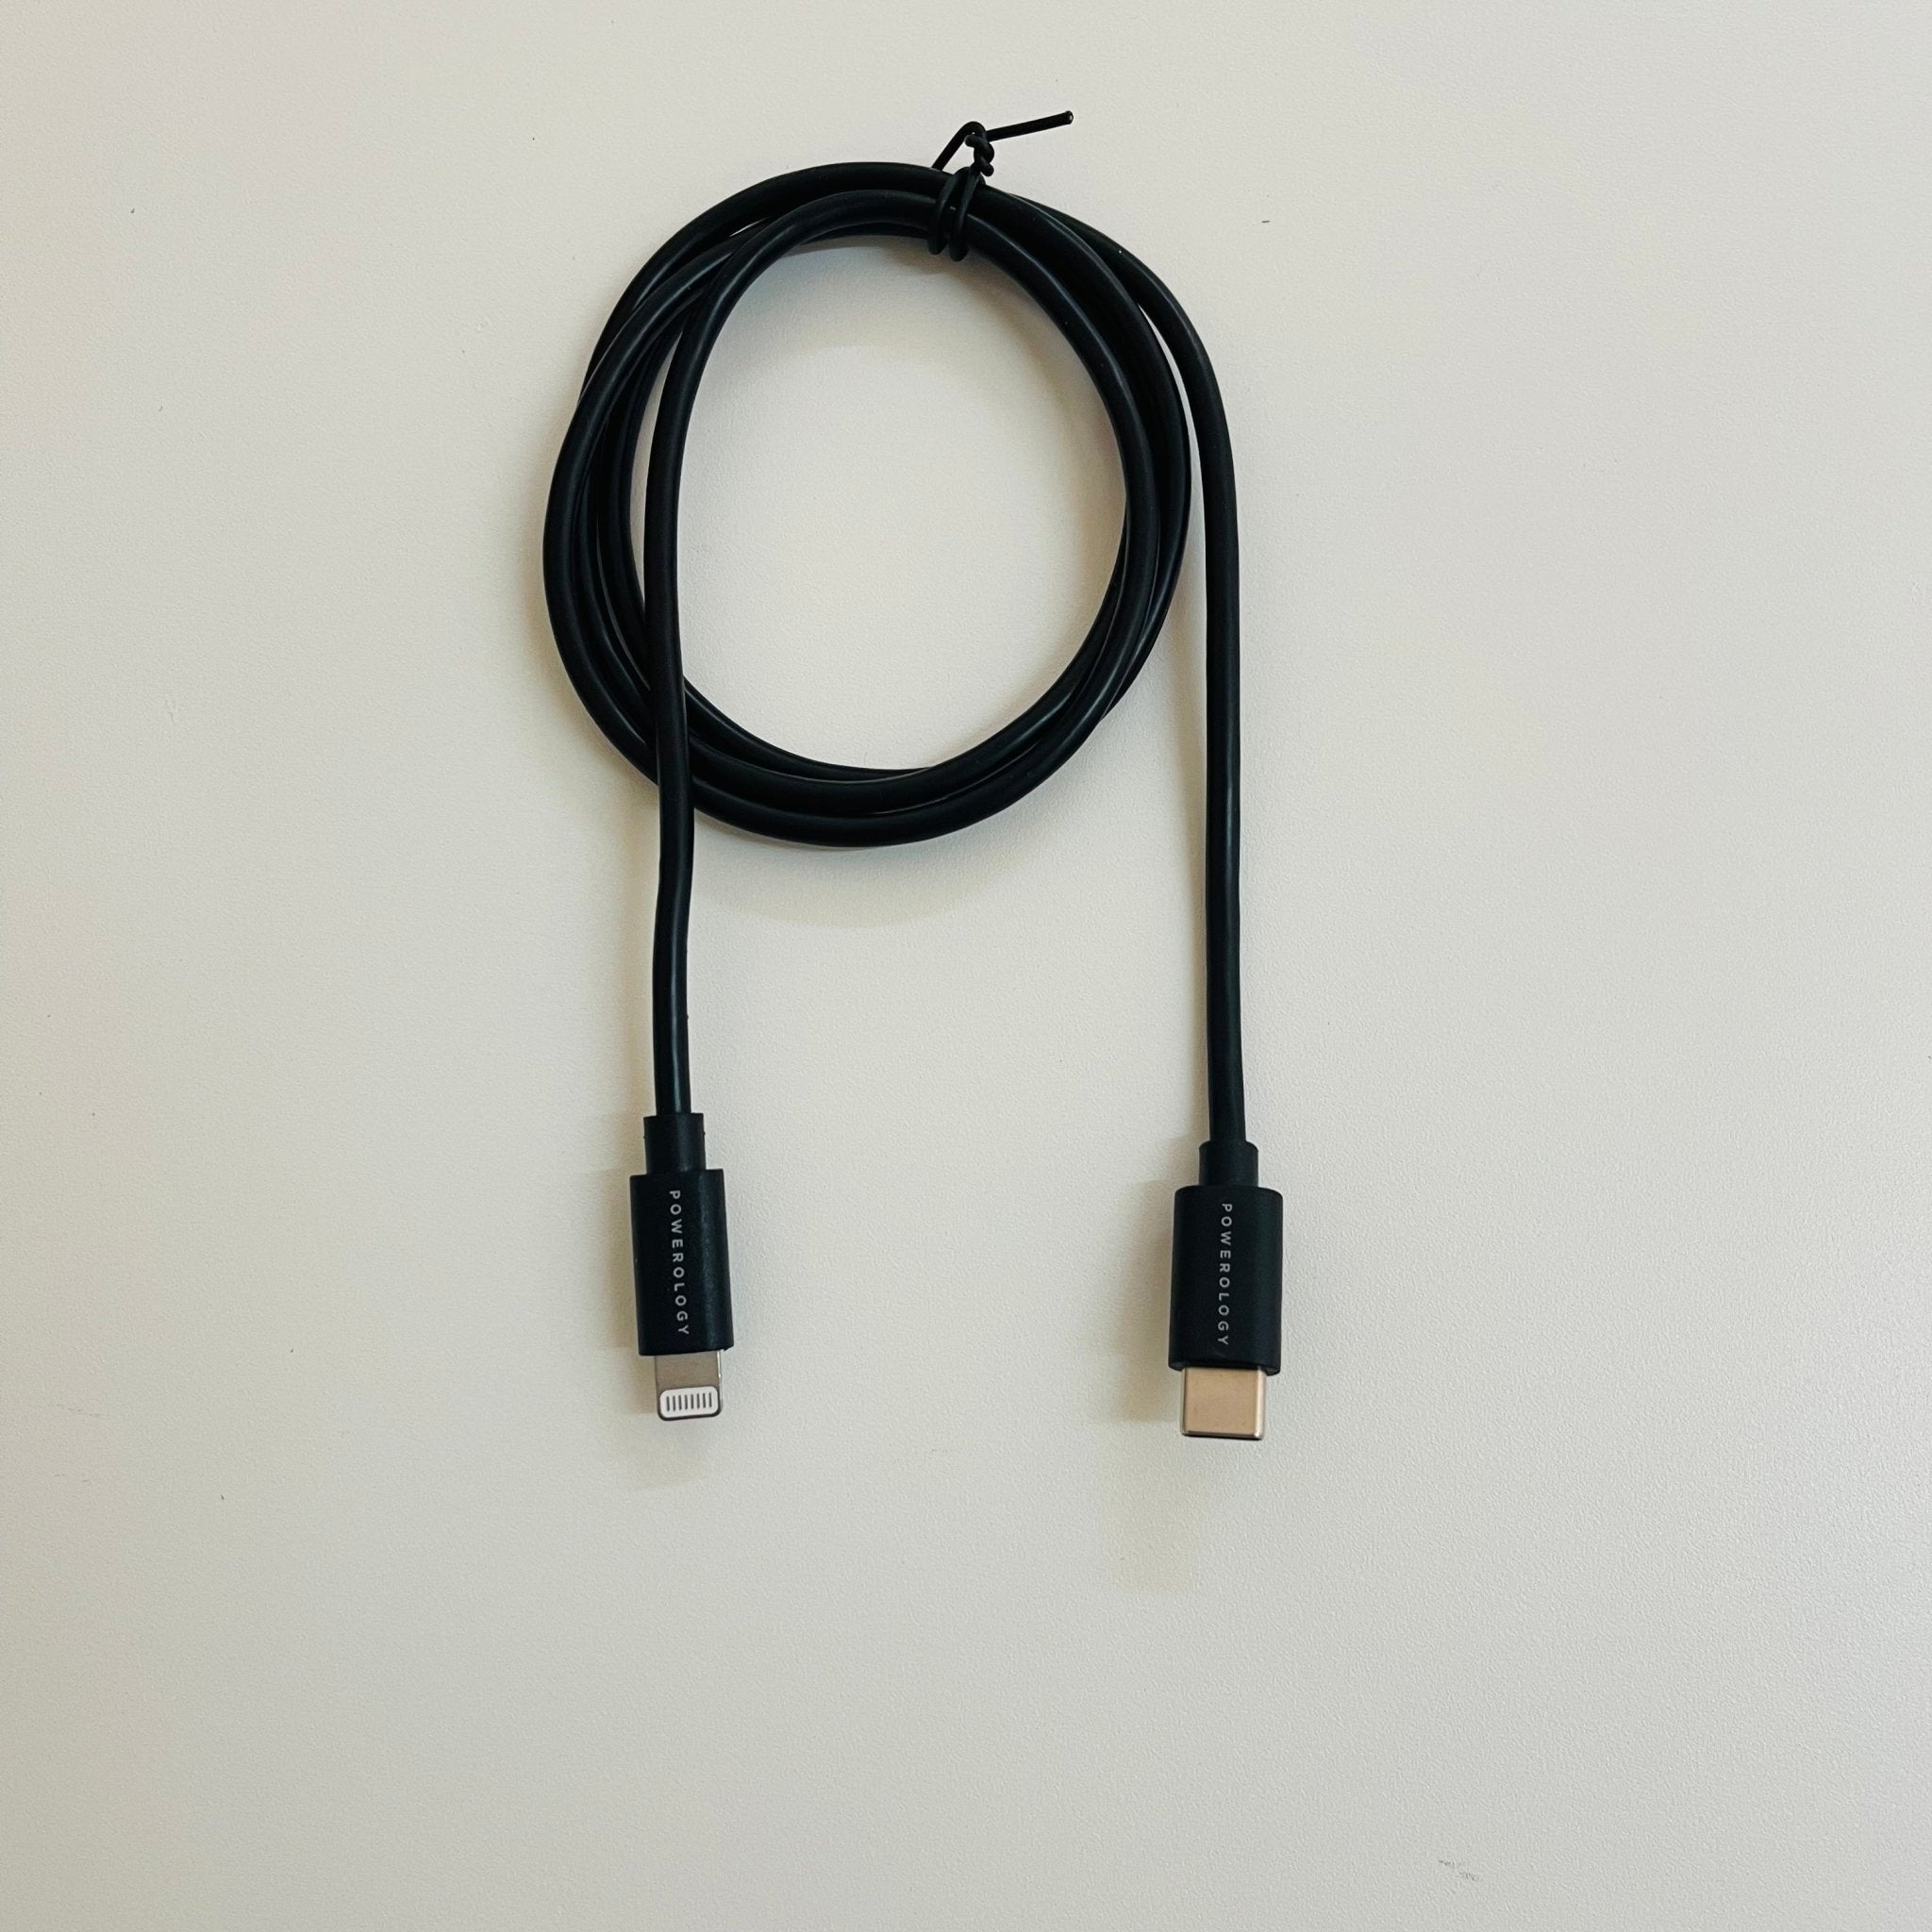 Used - Powerology USB-C To Lightning Cable 0.9m/3ft And 0.25m/0.8ft Combo